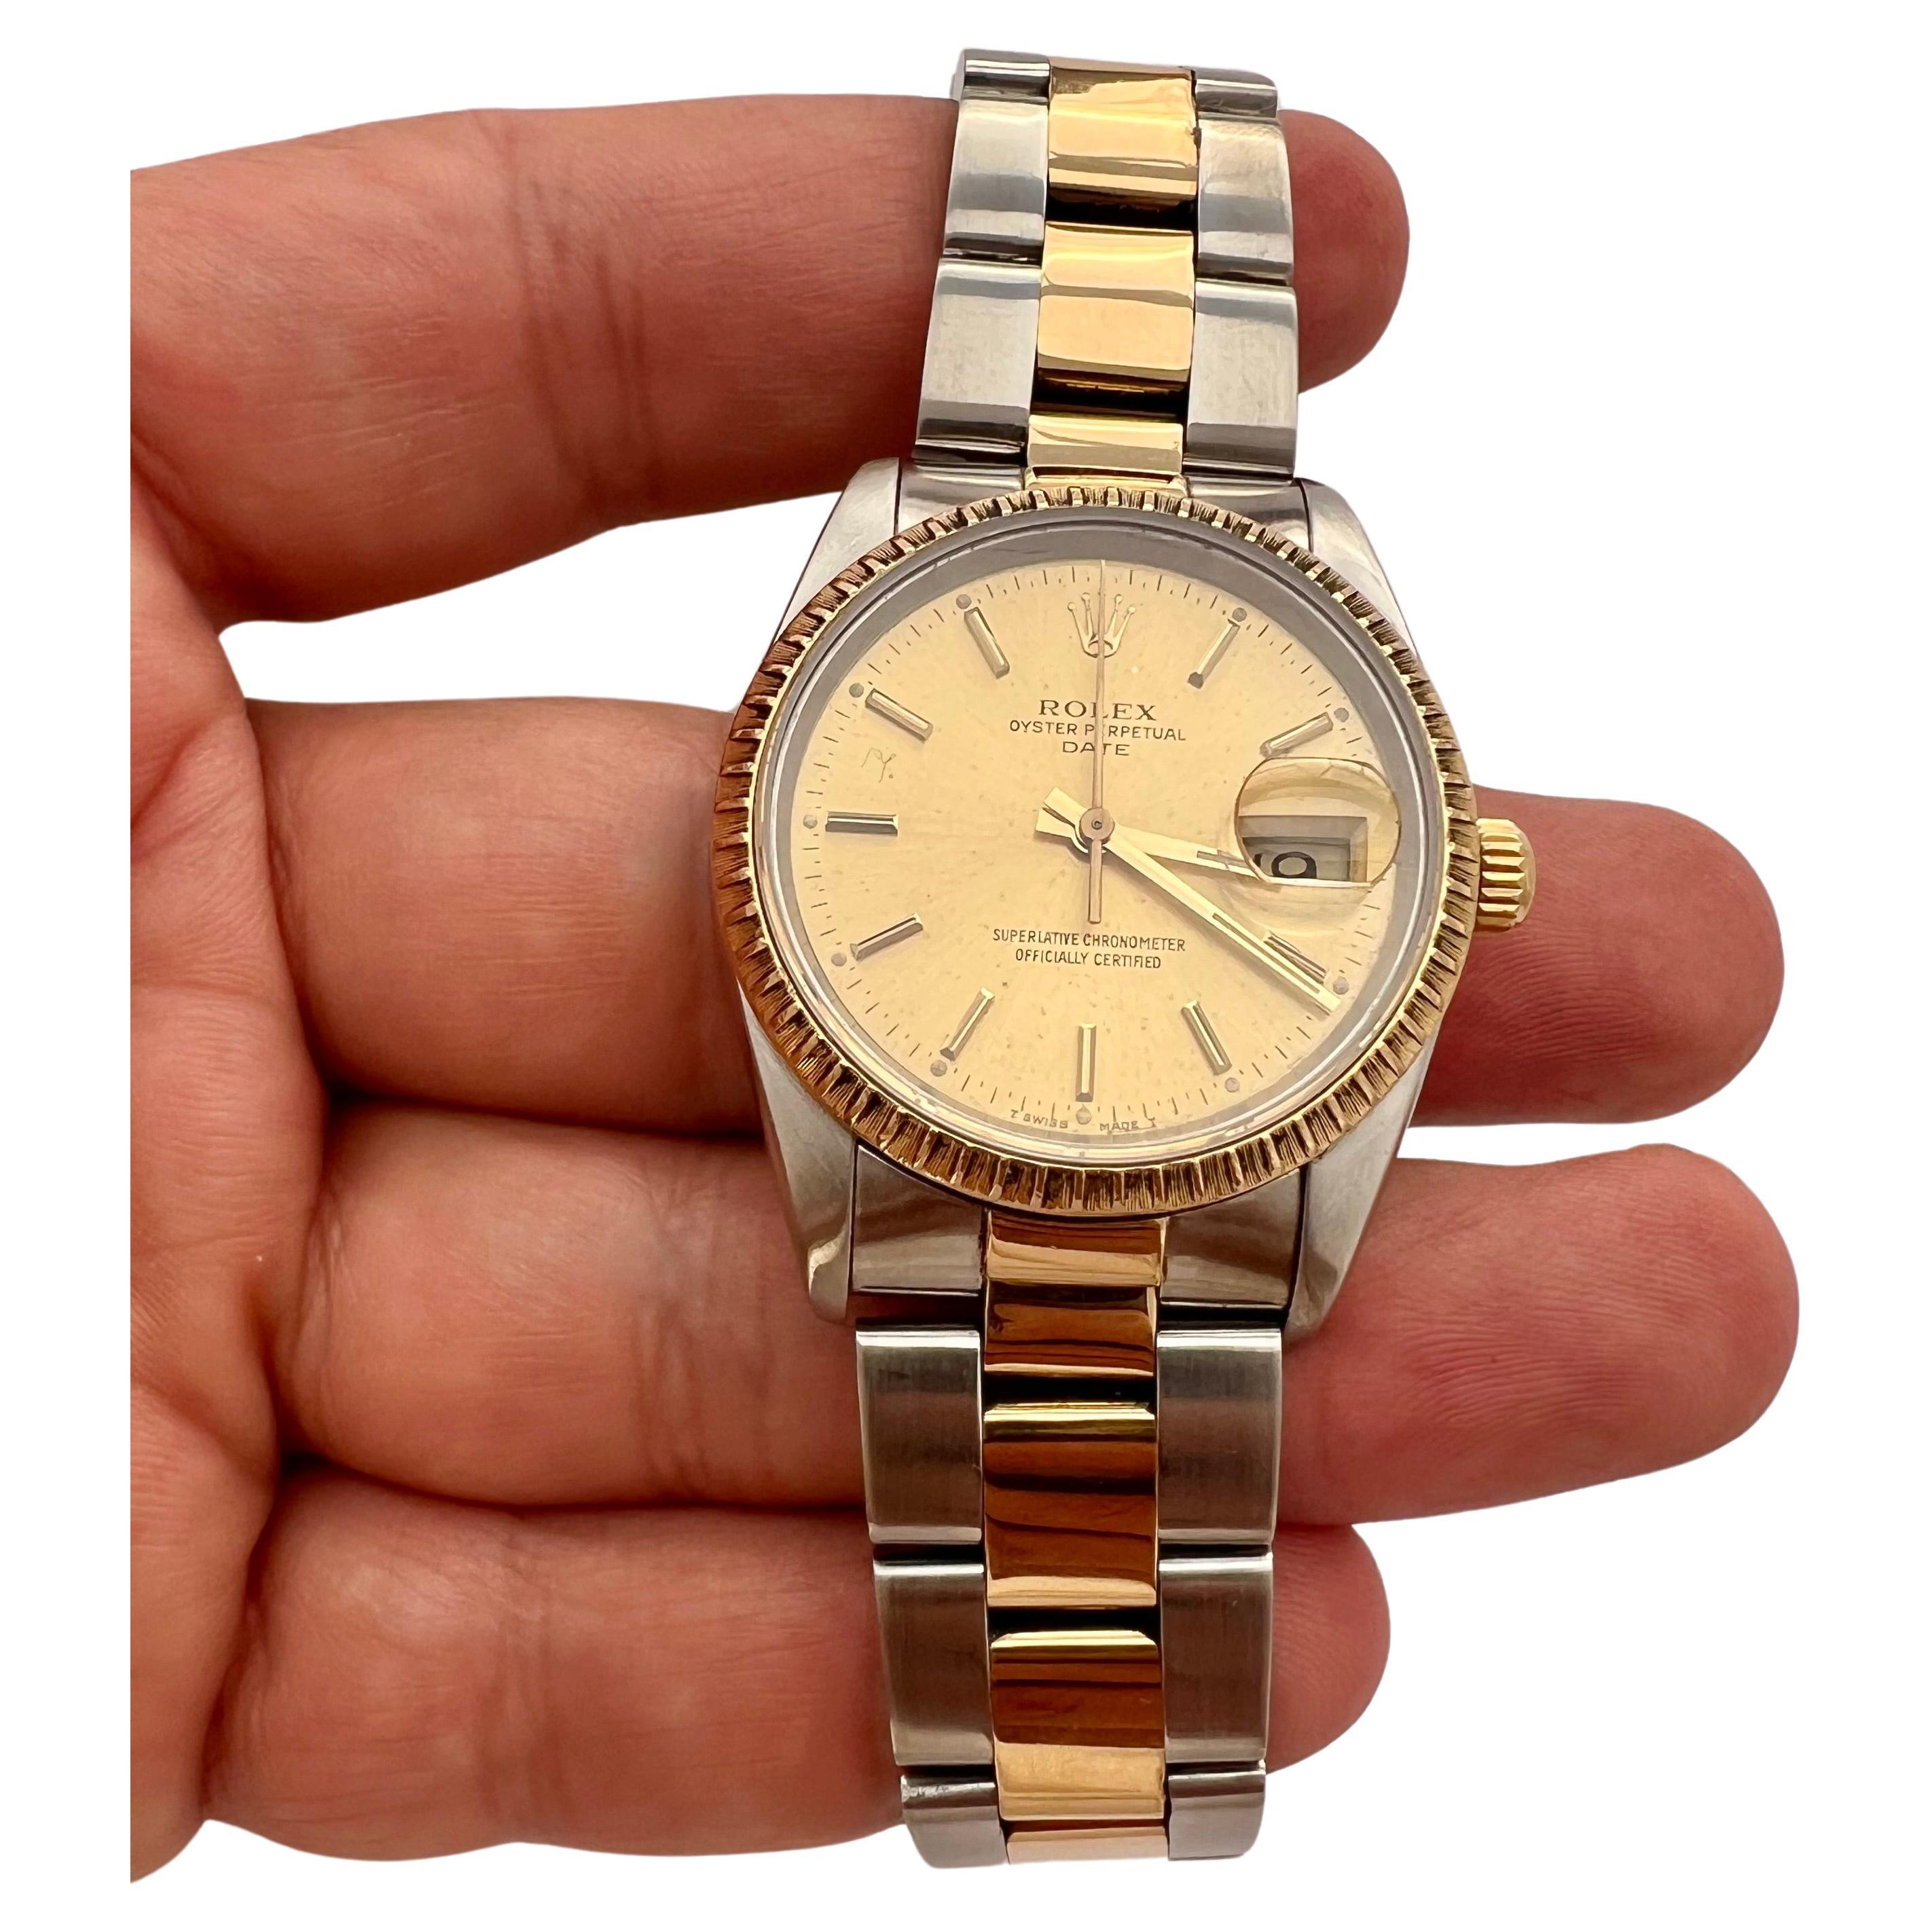 What should I know before buying a Rolex?